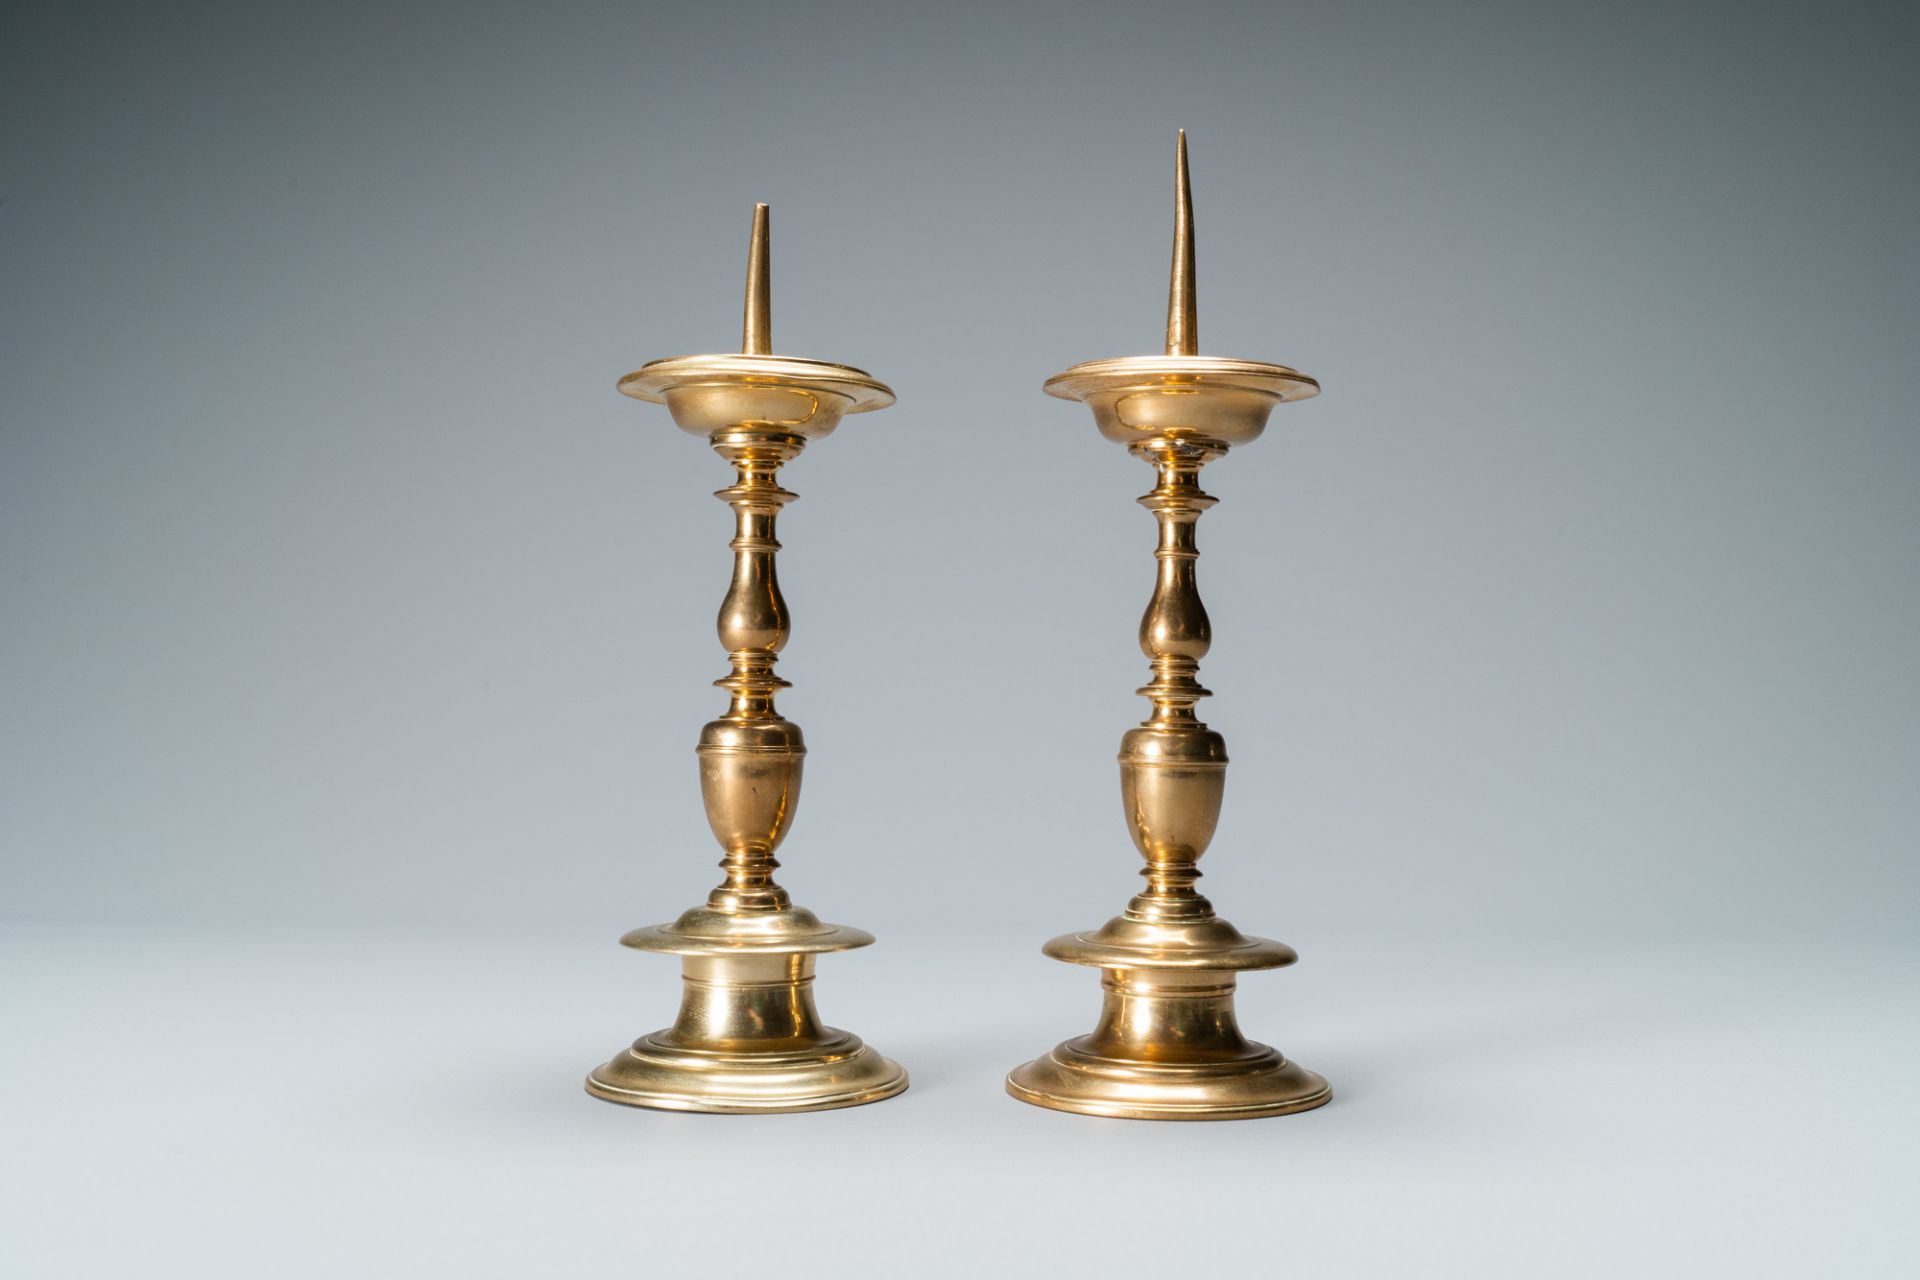 A pair of brass alloy candlesticks, Italy, 17th C. - Image 5 of 7